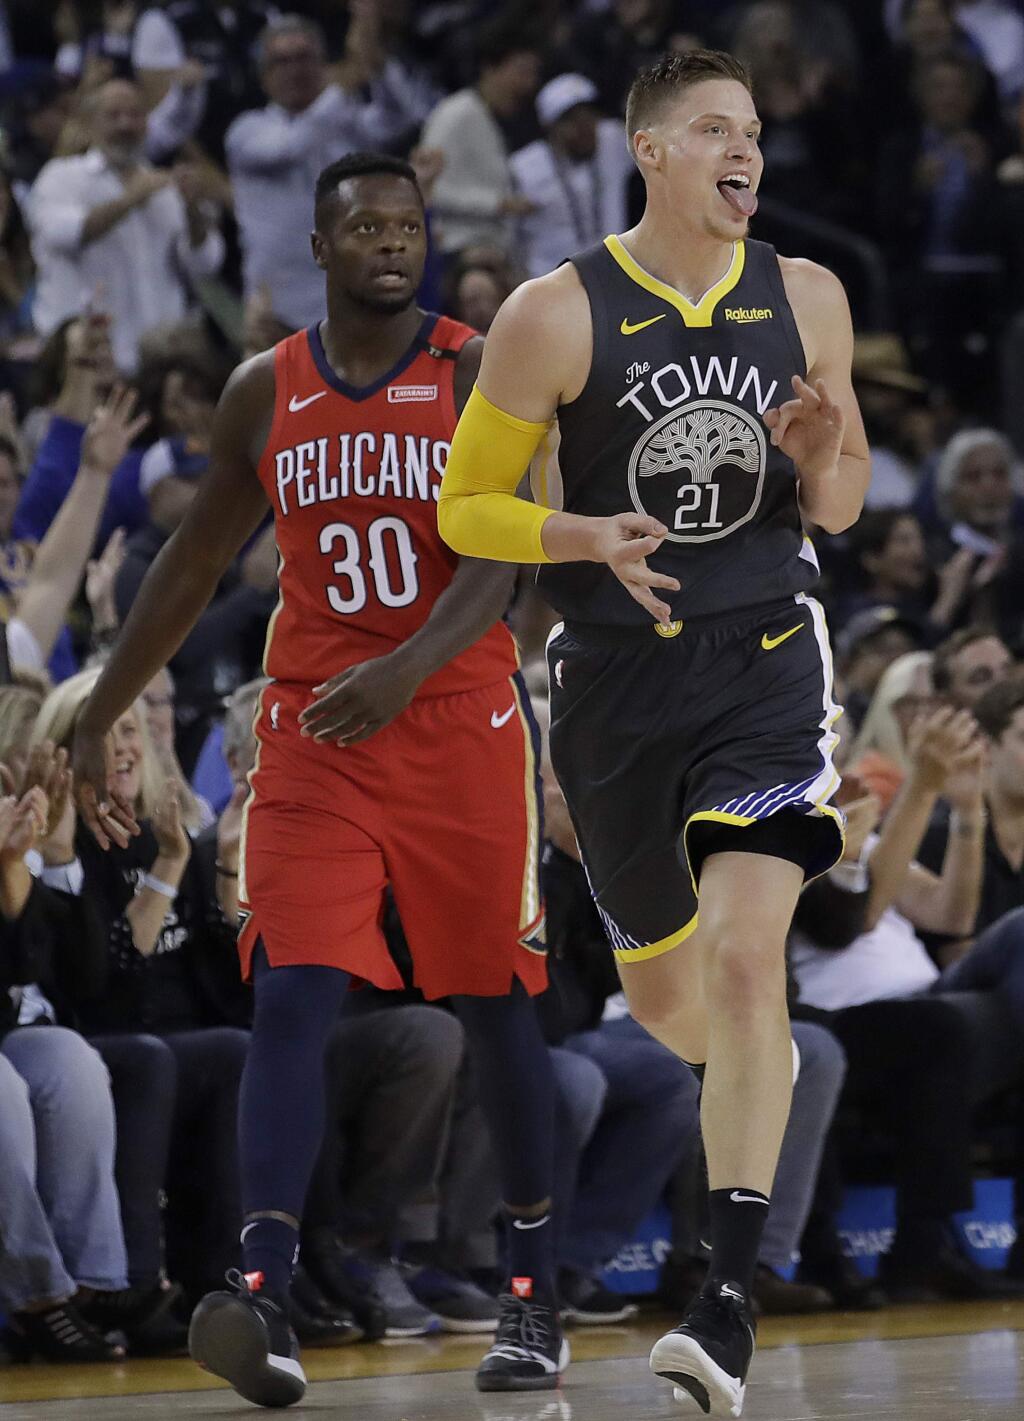 Golden State Warriors forward Jonas Jerebko celebrates after scoring in front of New Orleans Pelicans forward Julius Randle during the first half in Oakland, Wednesday, Oct. 31, 2018. (AP Photo/Jeff Chiu)